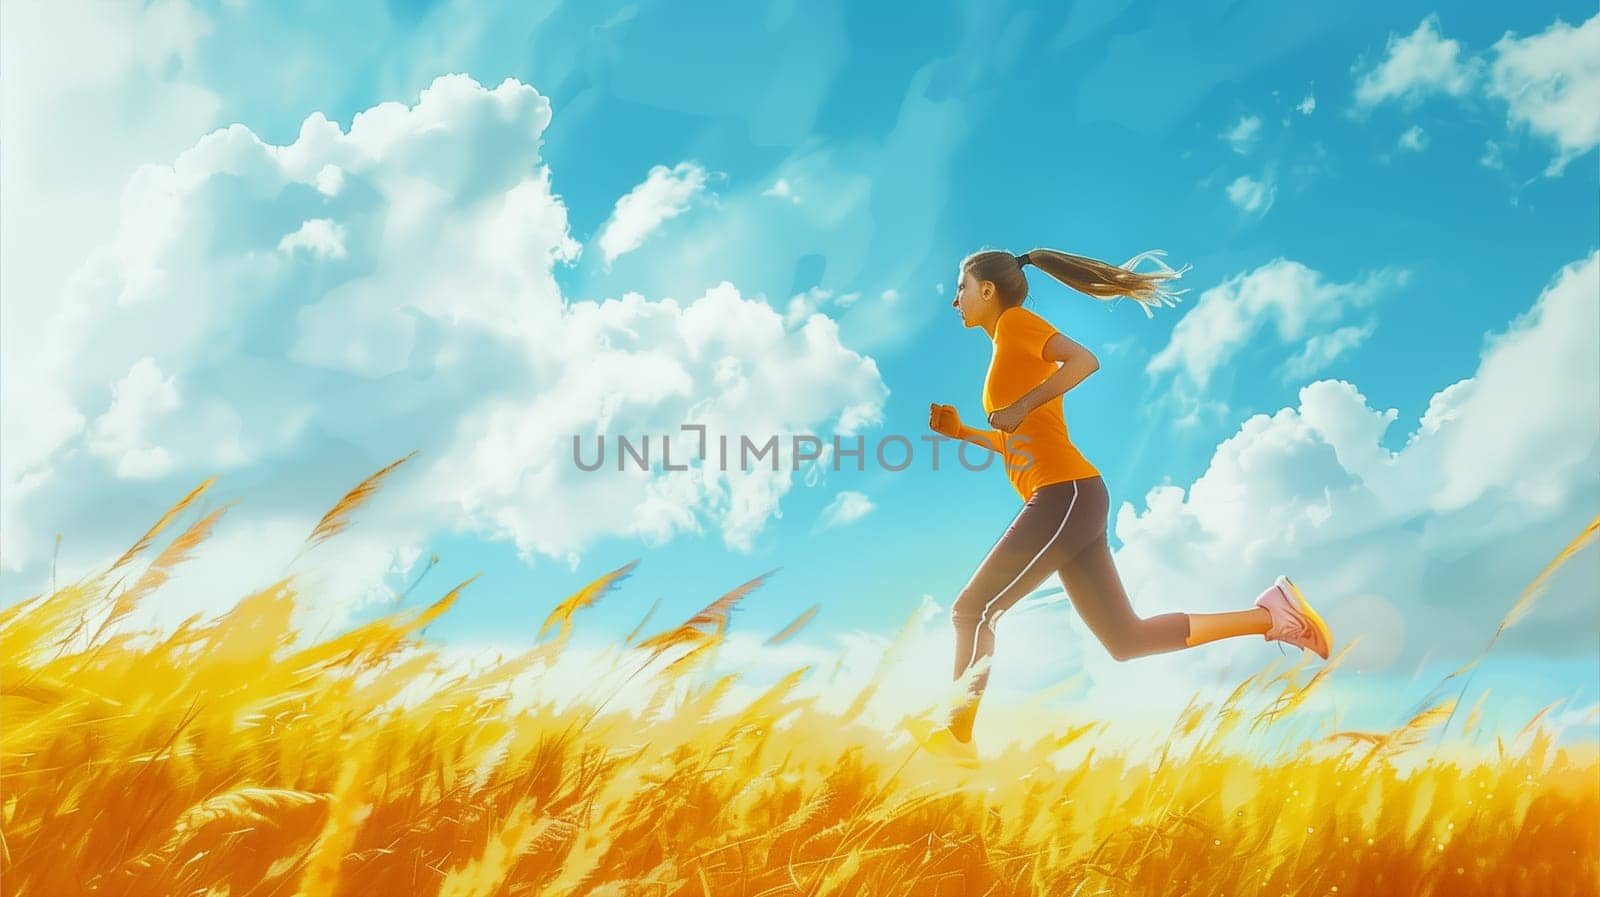 Woman Running Through Field of Tall Grass by Sd28DimoN_1976